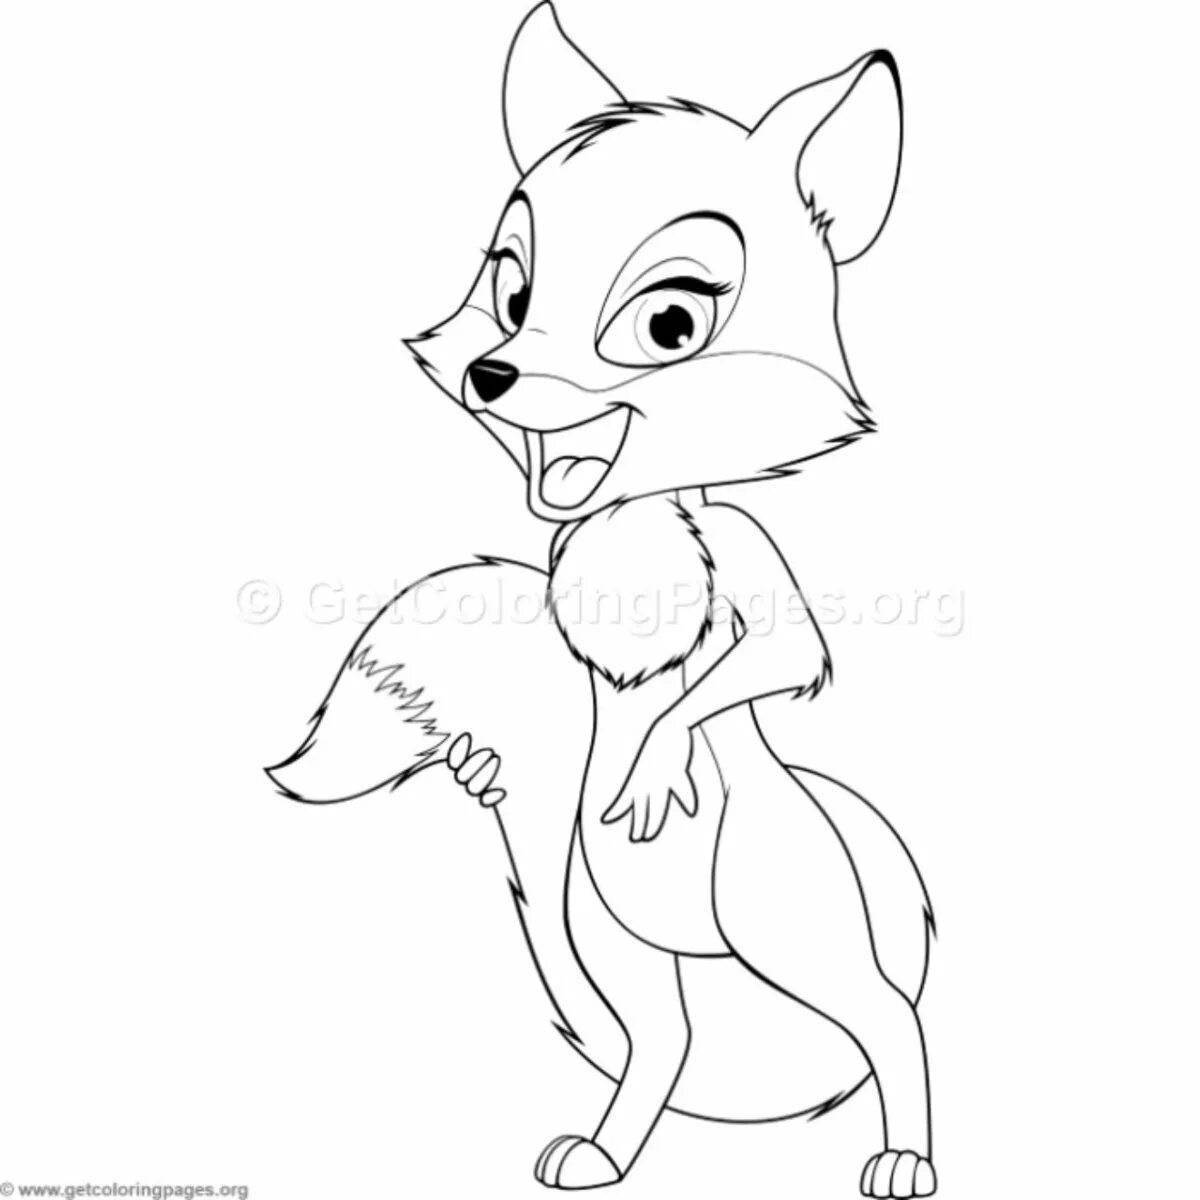 Colouring cute fox for children 2-3 years old